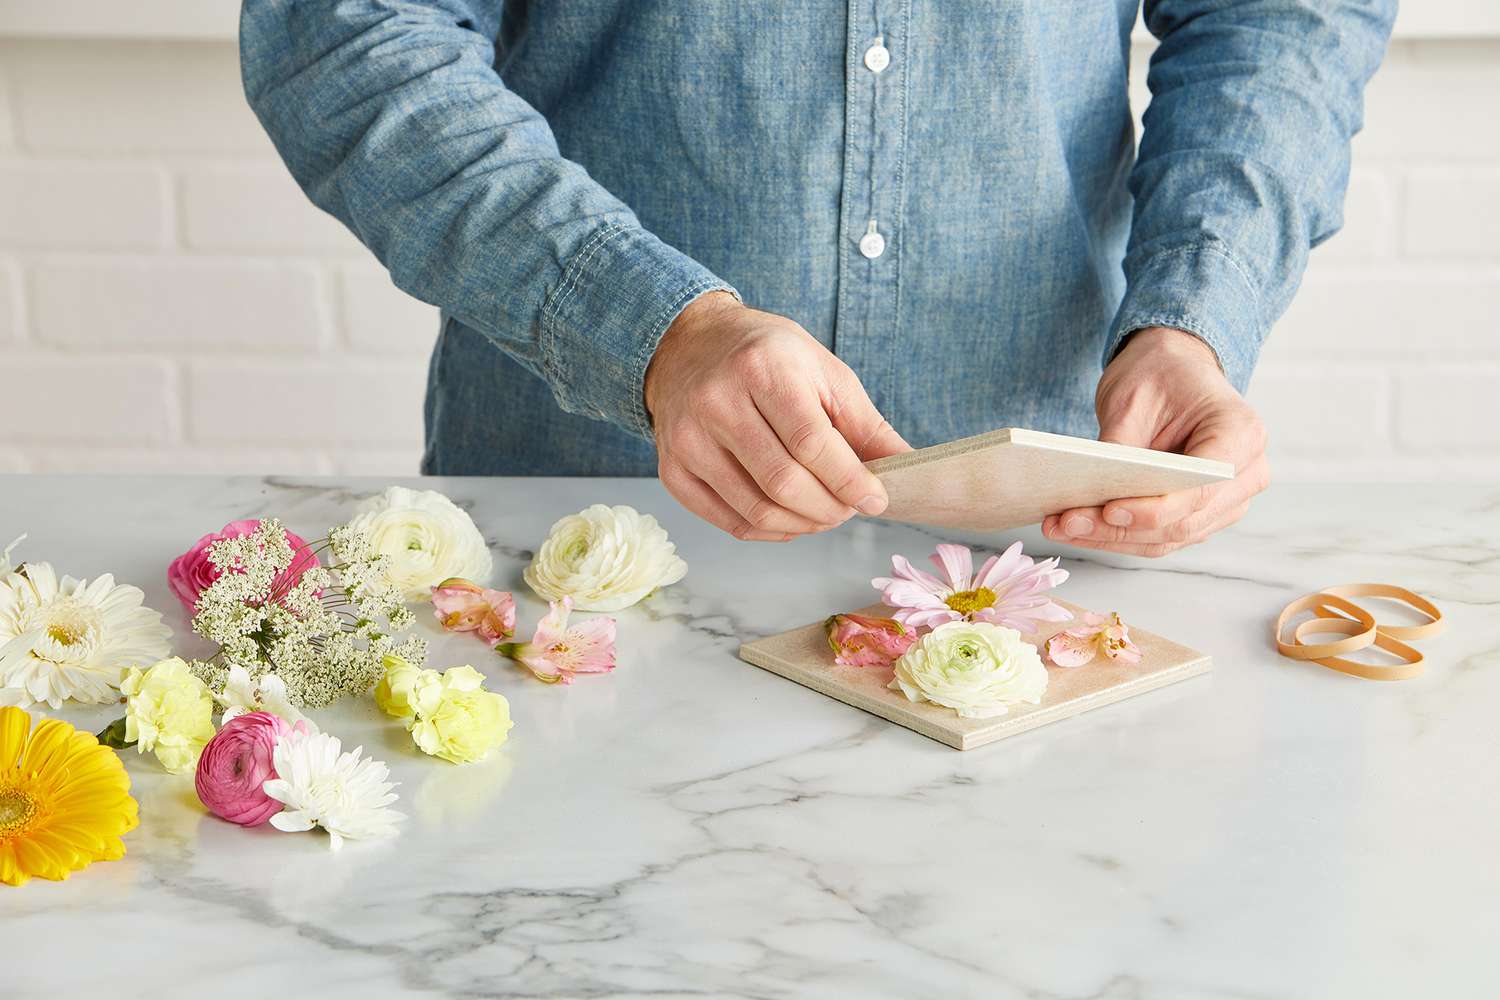 pressing flowers with tiles squares next to rubber band